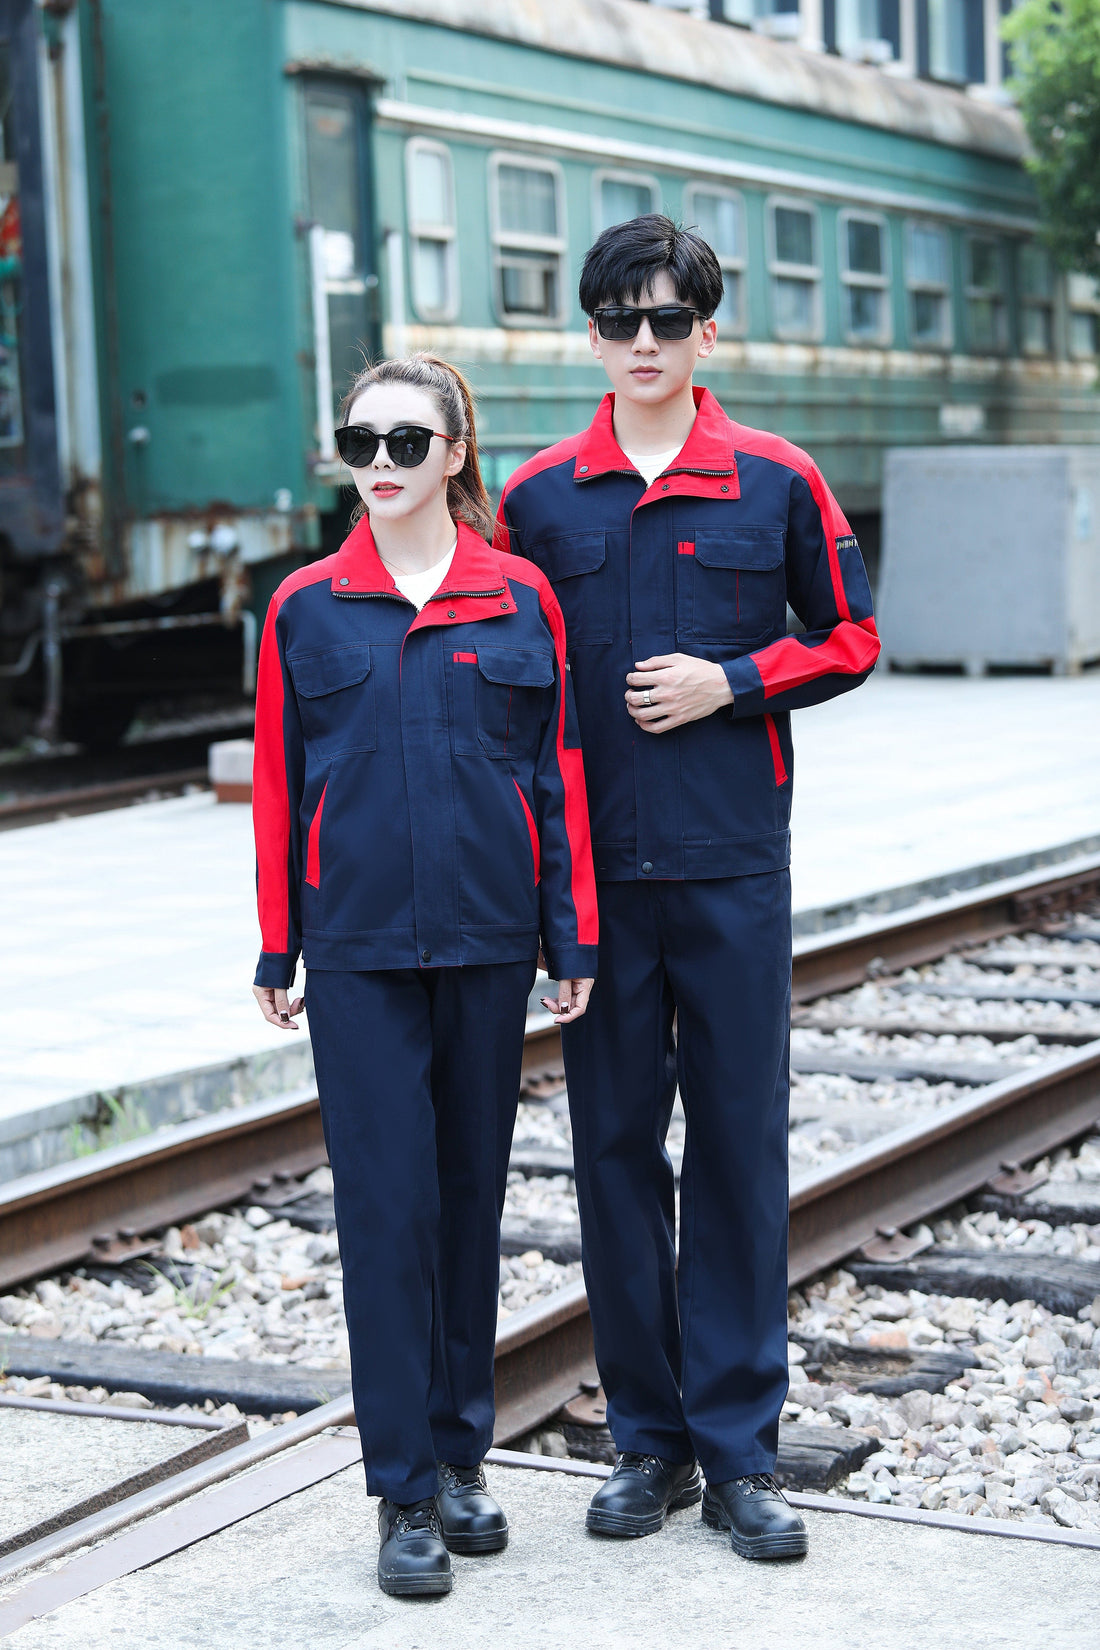 Corals Trading Co. 可樂思百貨商行 纯棉 Autumn and winter long-sleeved pure cotton series workwear SD-PC-W801